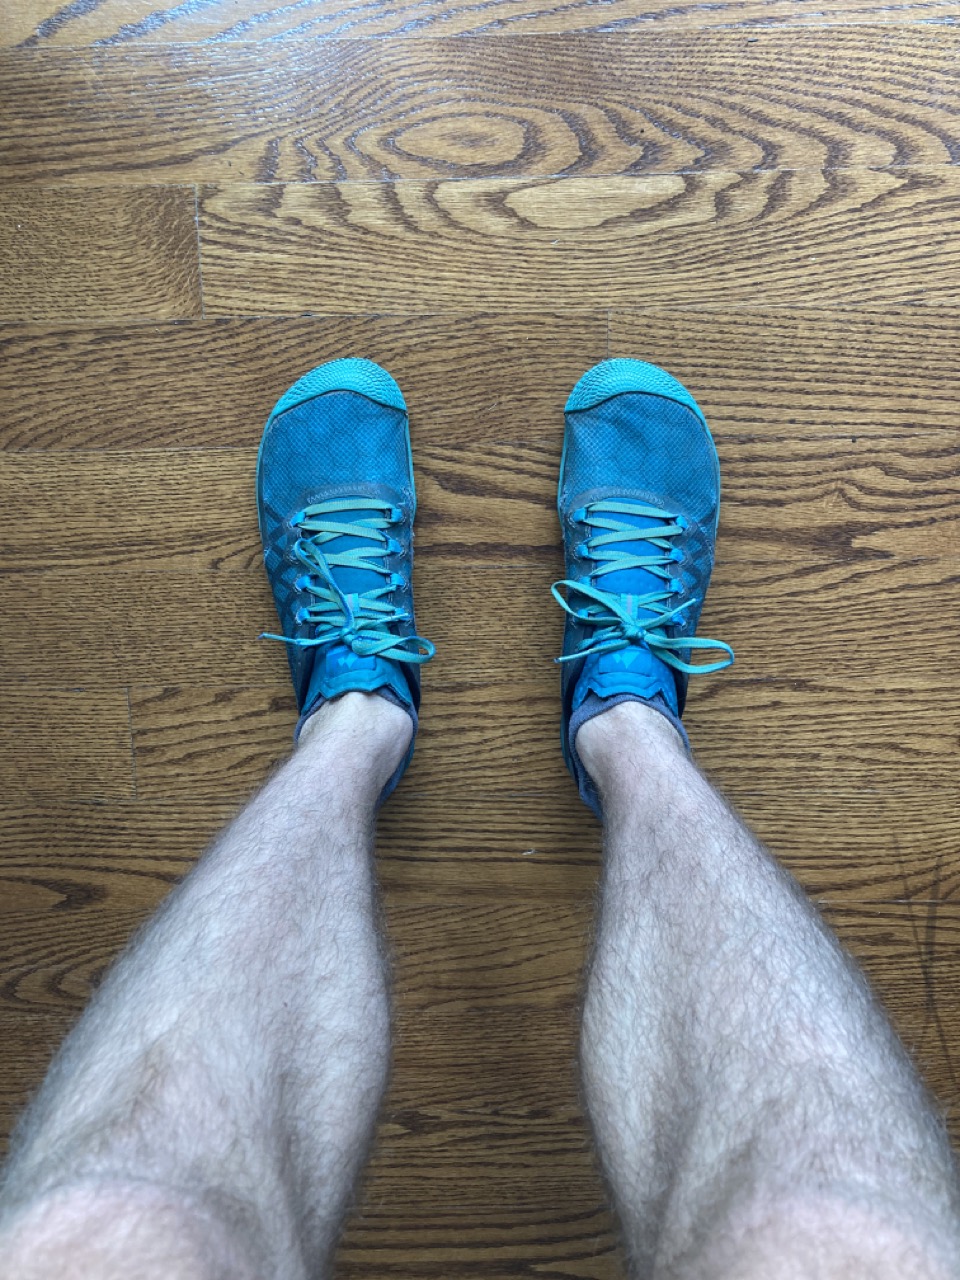 The Toe Box of Your Shoes is Critical to Your Health